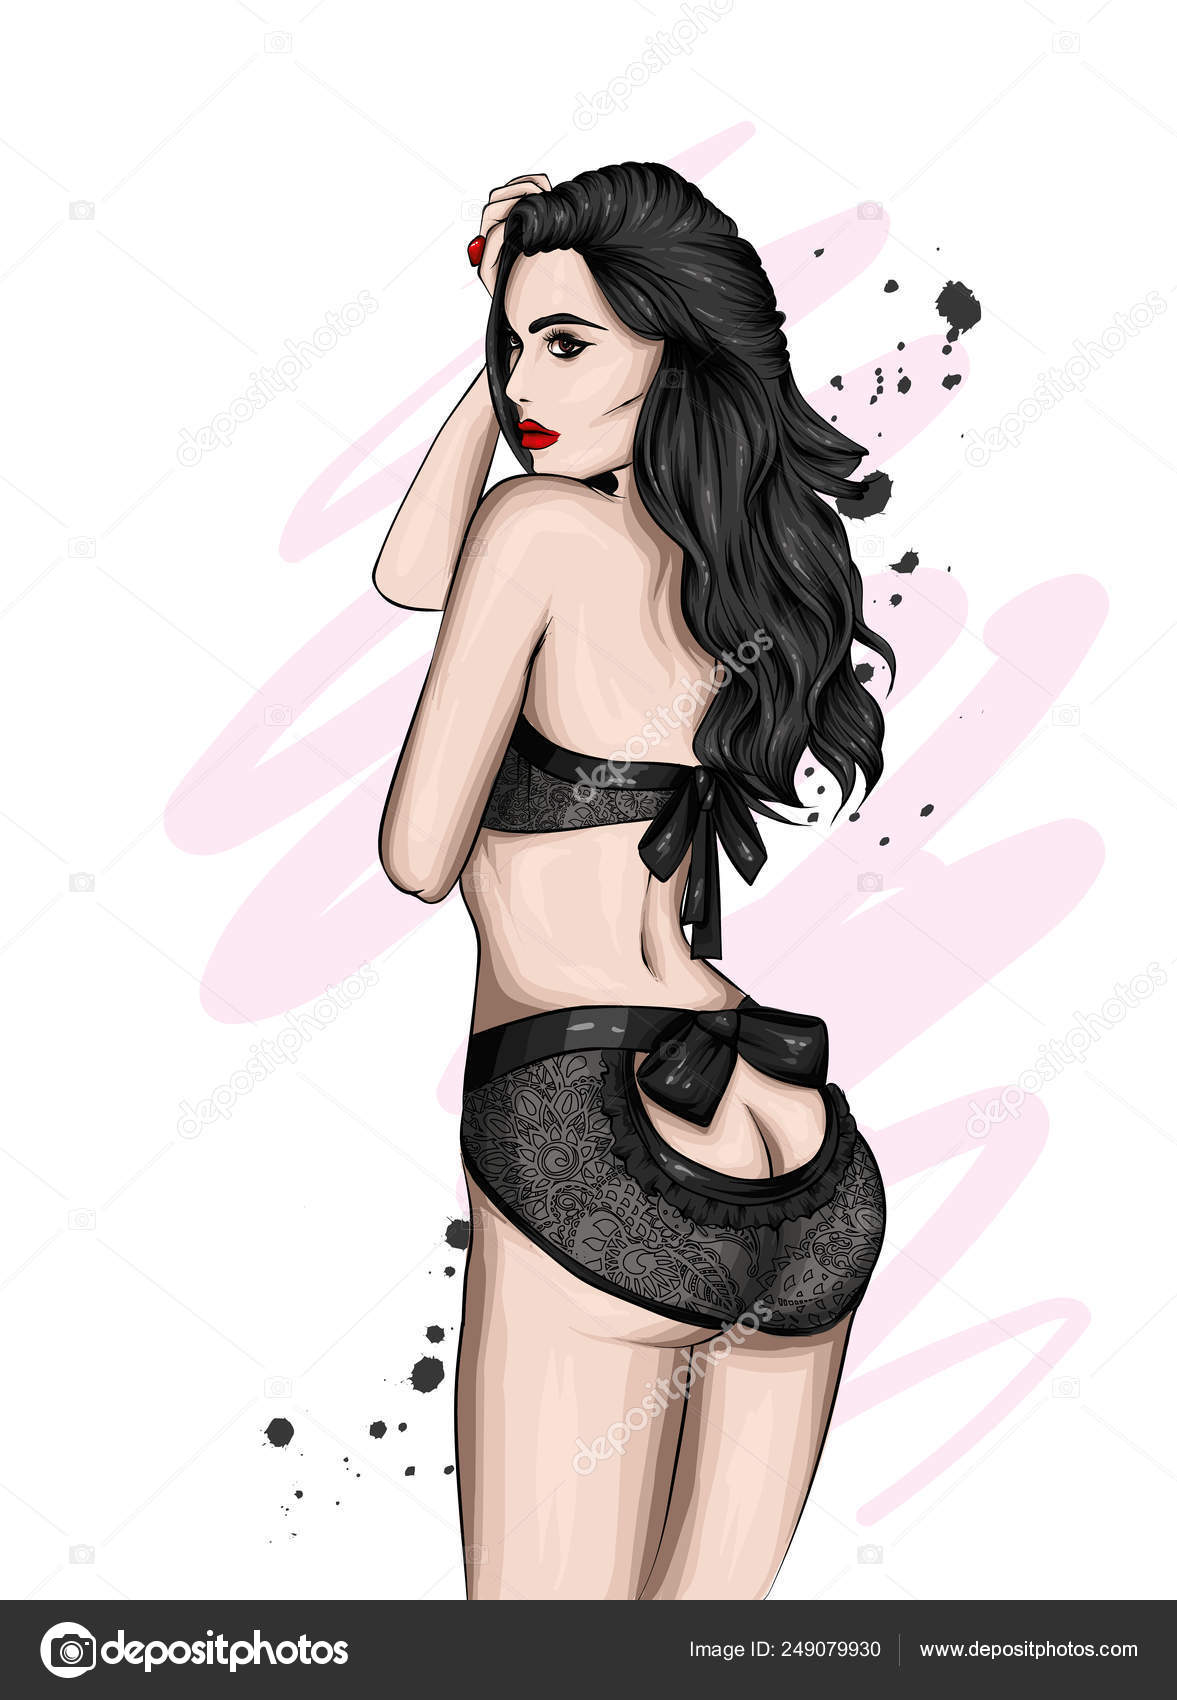 Beautiful Girl Sexy Underwear Love Sex Vector Illustration Greeting Card Stock Vector by ©VitalyGrin 249079930 pic